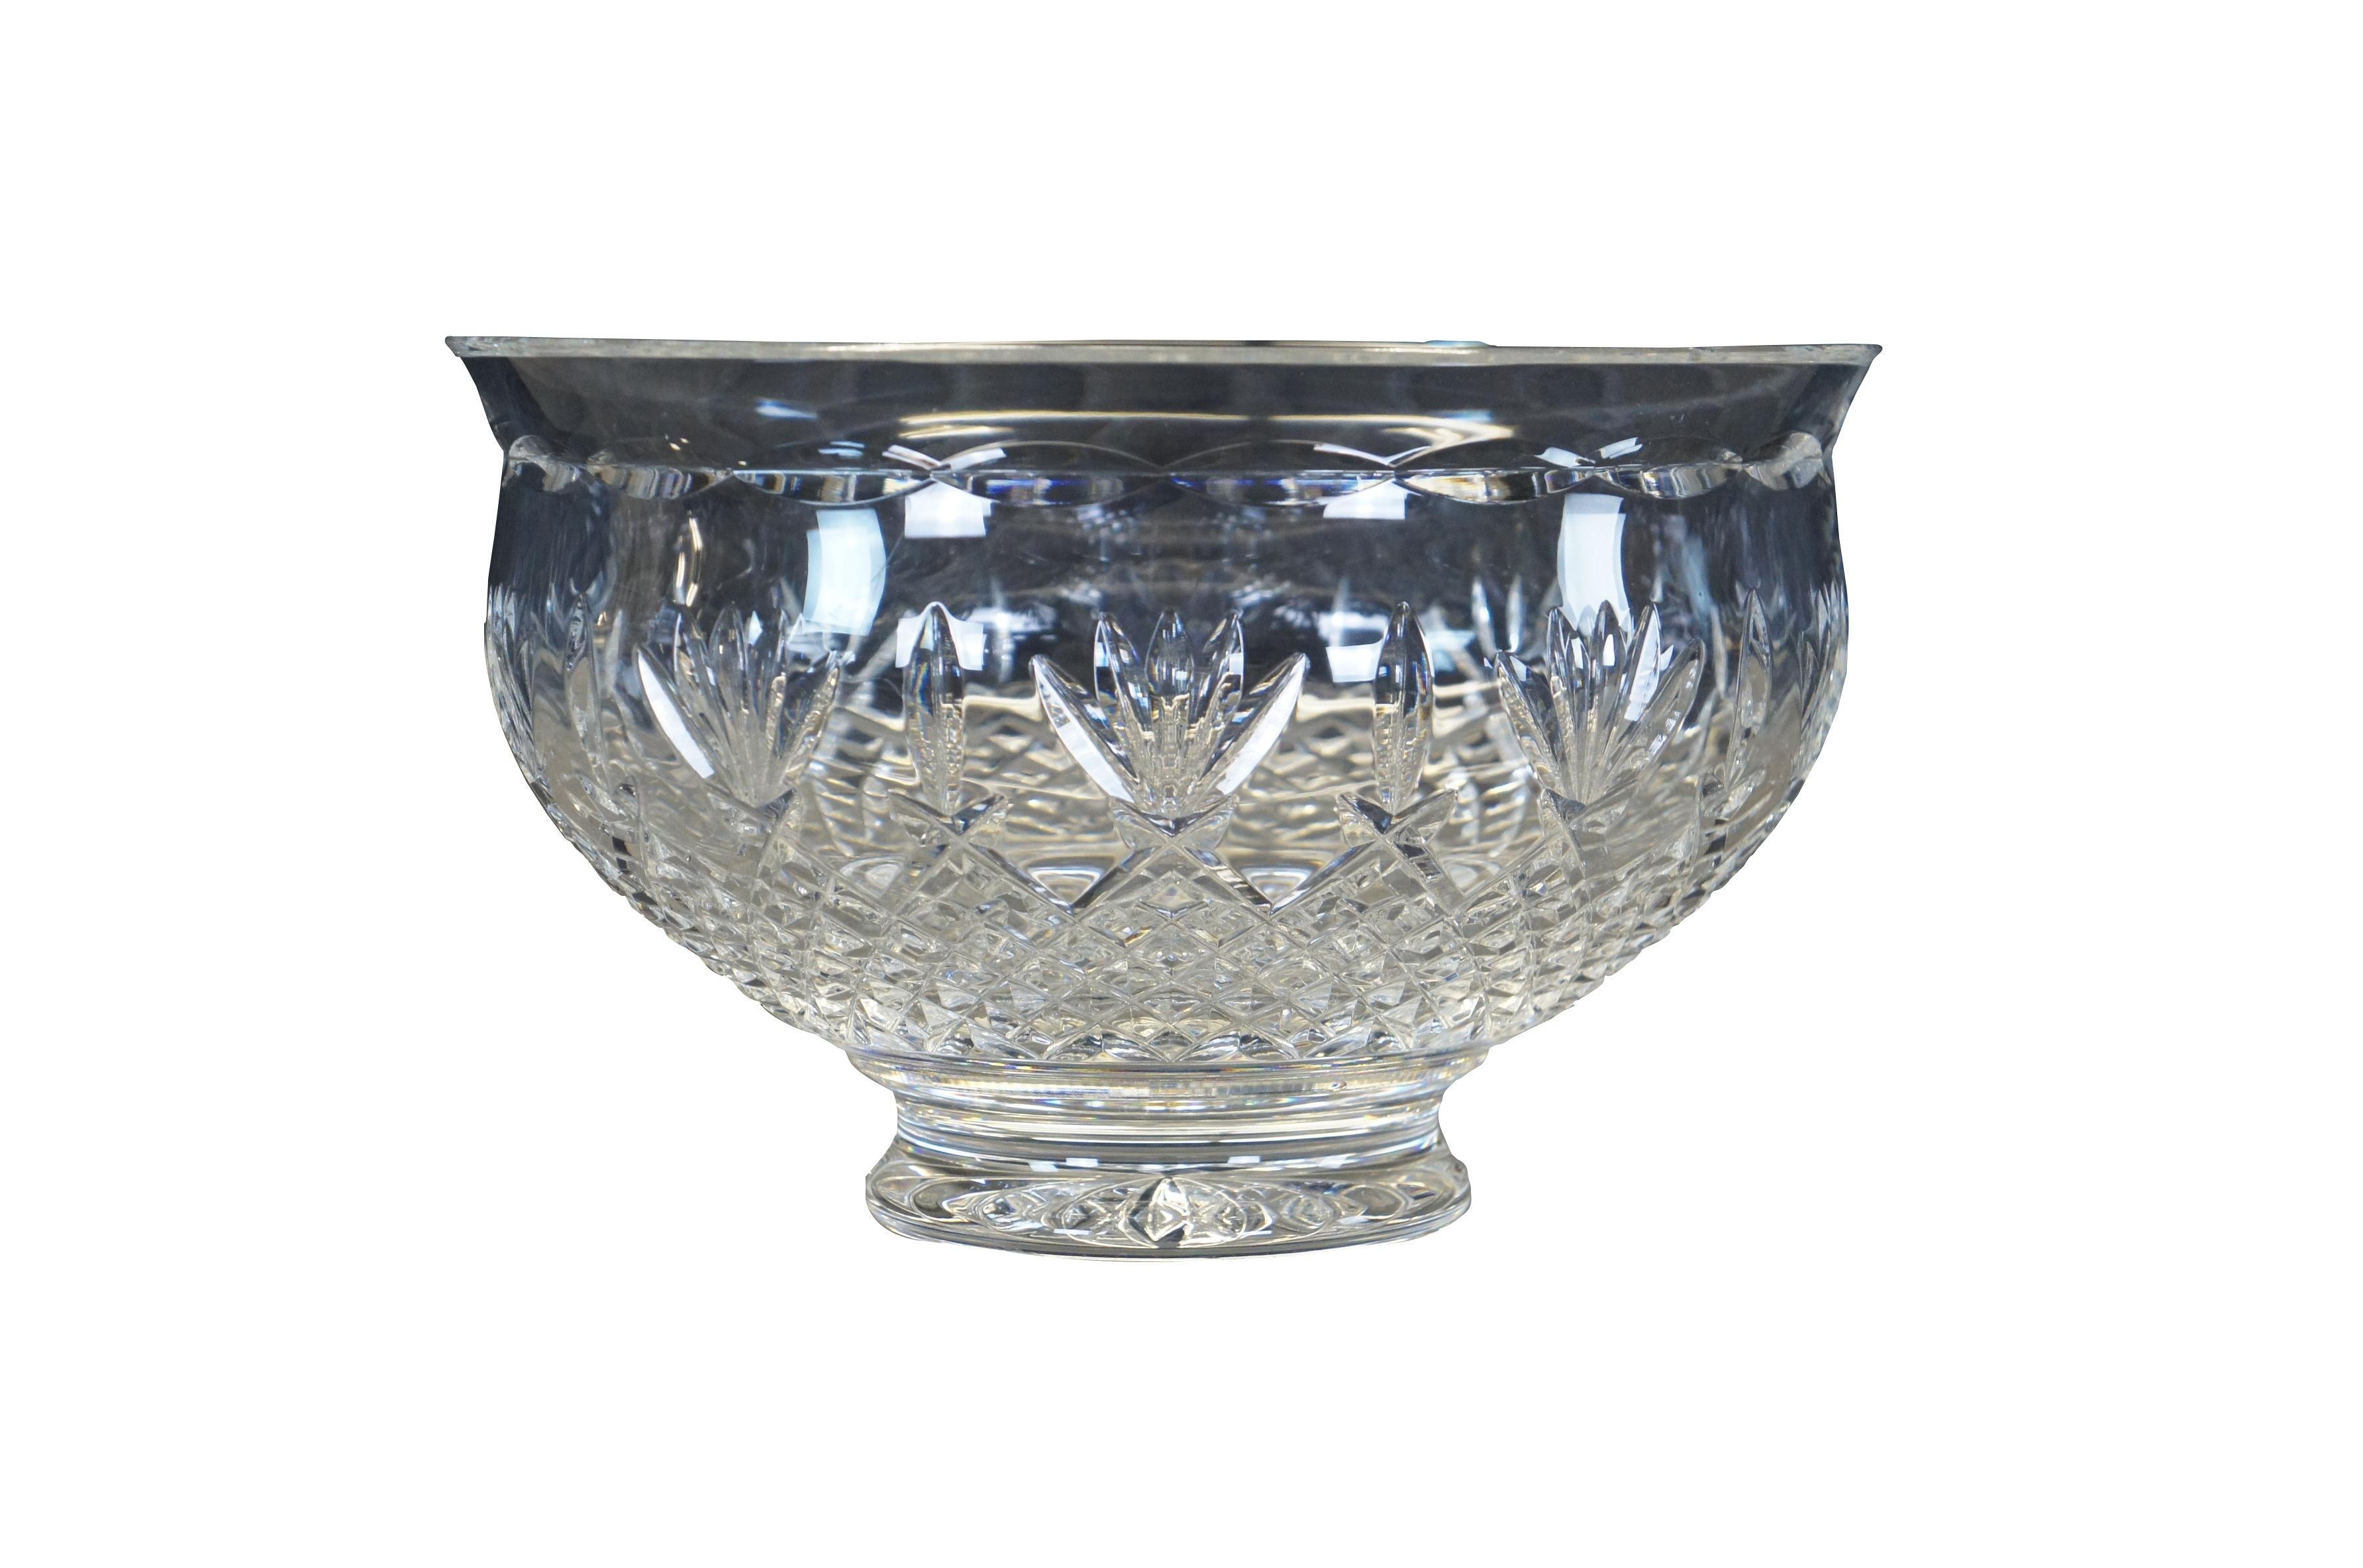 Ornate and substantial, the Killarney pattern by Waterford is characterized by intricate deep cutting and classic design; showcasing the brilliant clarity of crystal. Whether you use it to display a centerpiece, or fill it with candy or potpourri,